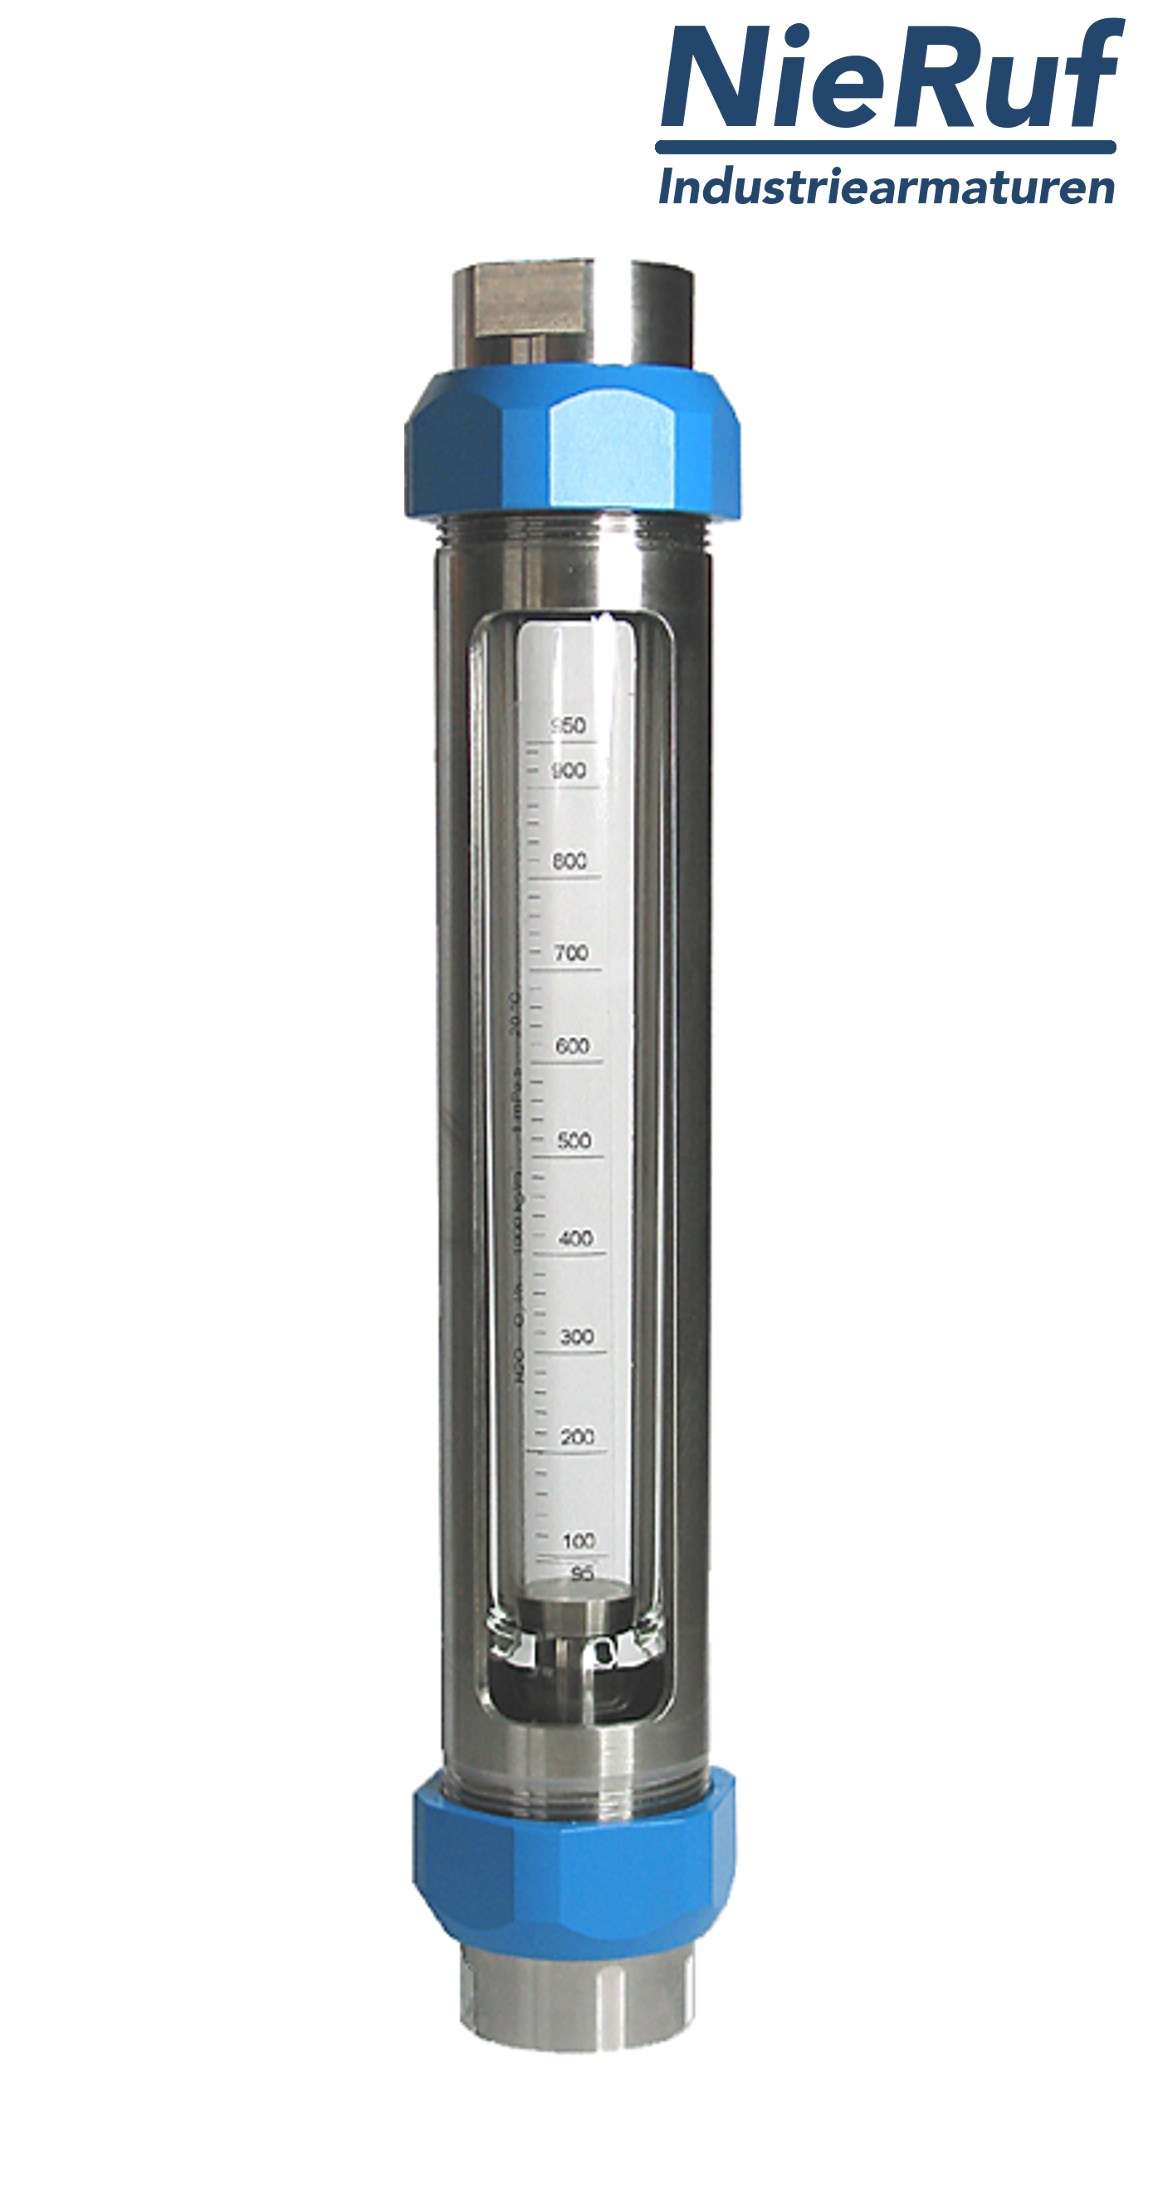 Variable area flowmeter stainless steel + borosilicate 1/2" inch 6.5 - 65.0 l/h water FKM